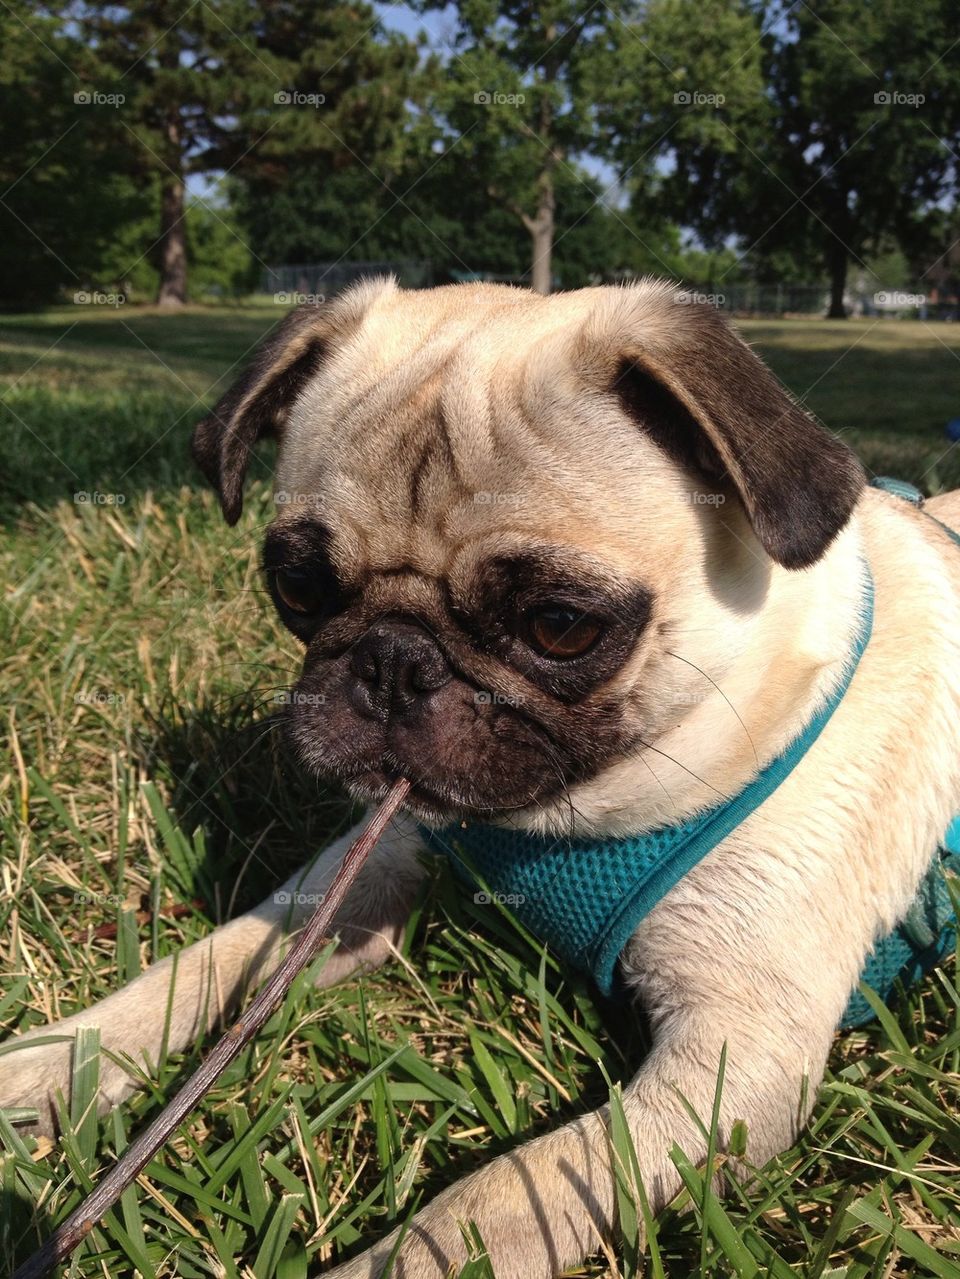 Pug and her stick